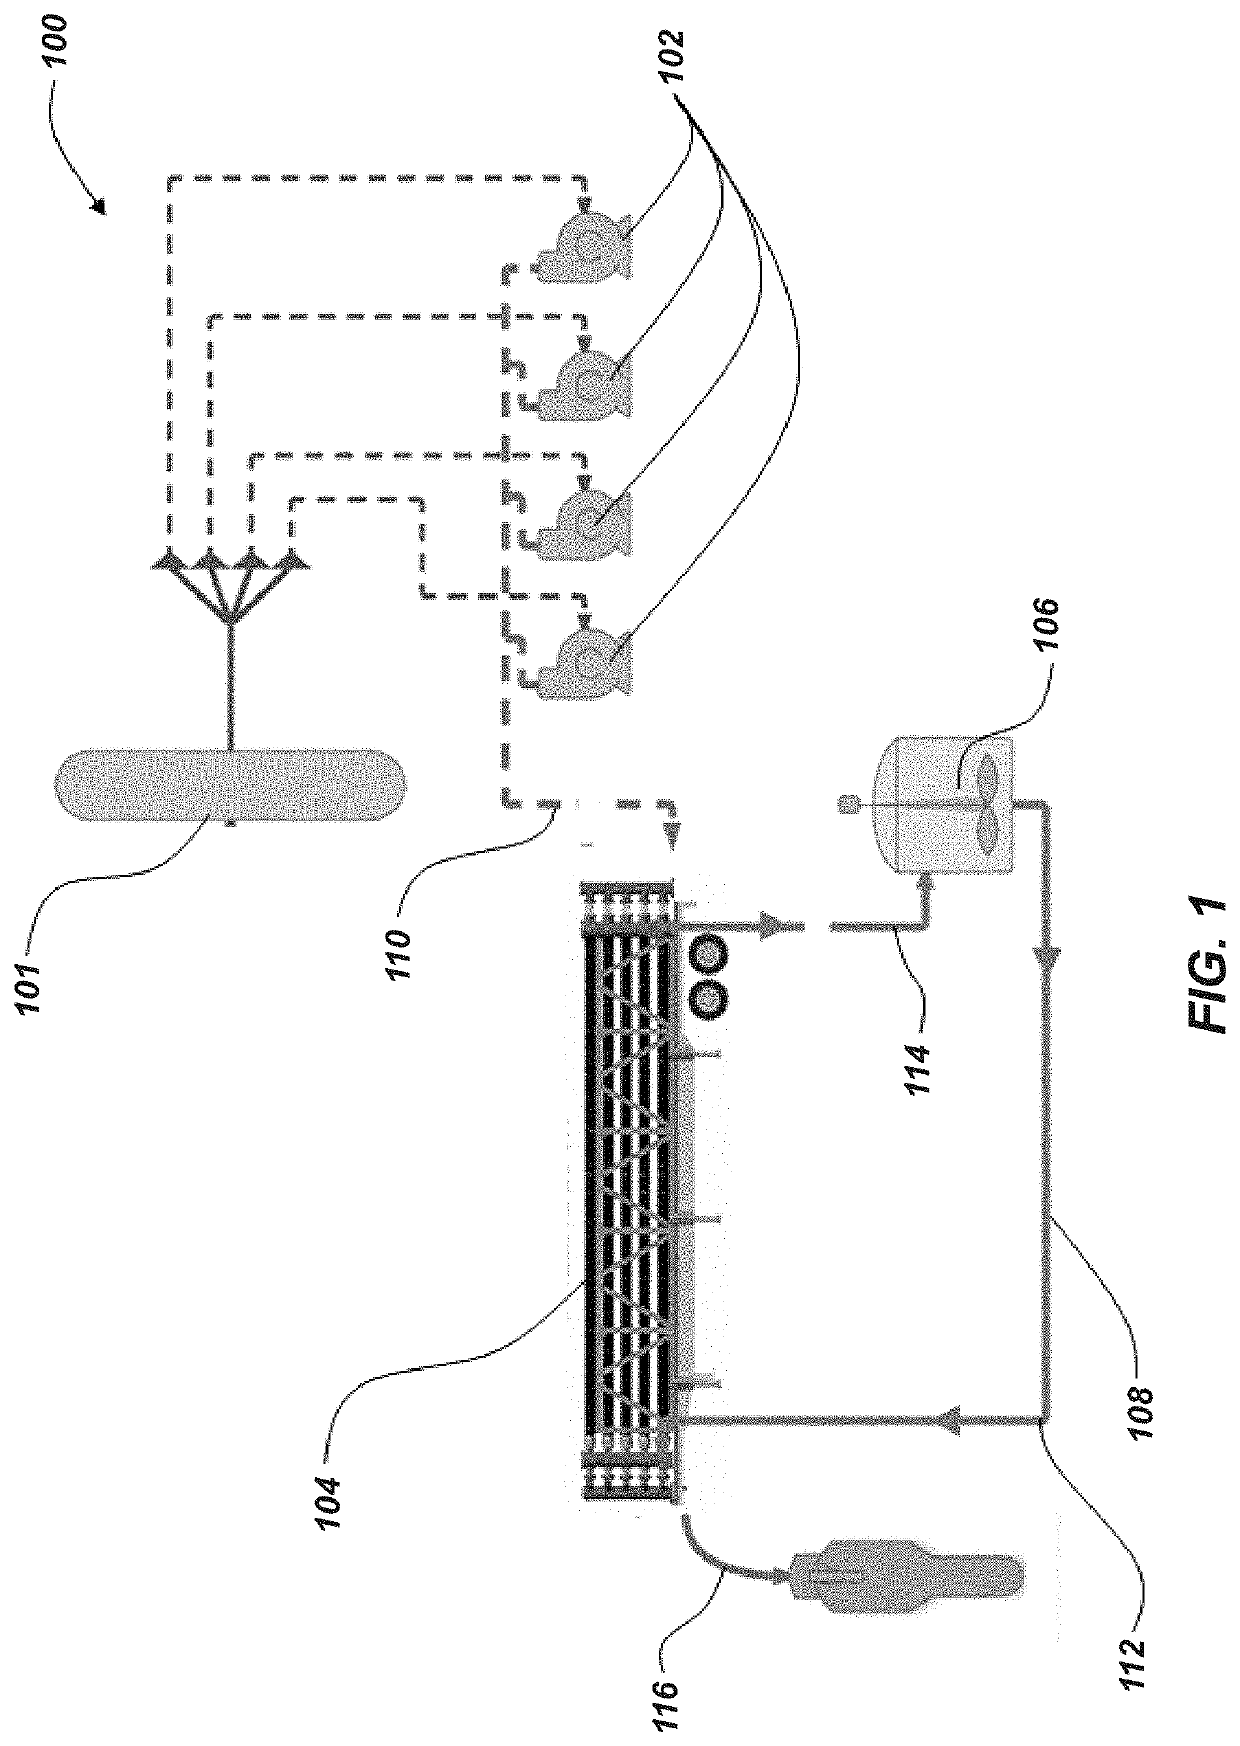 Valves including one or more flushing features and related assemblies, systems, and methods